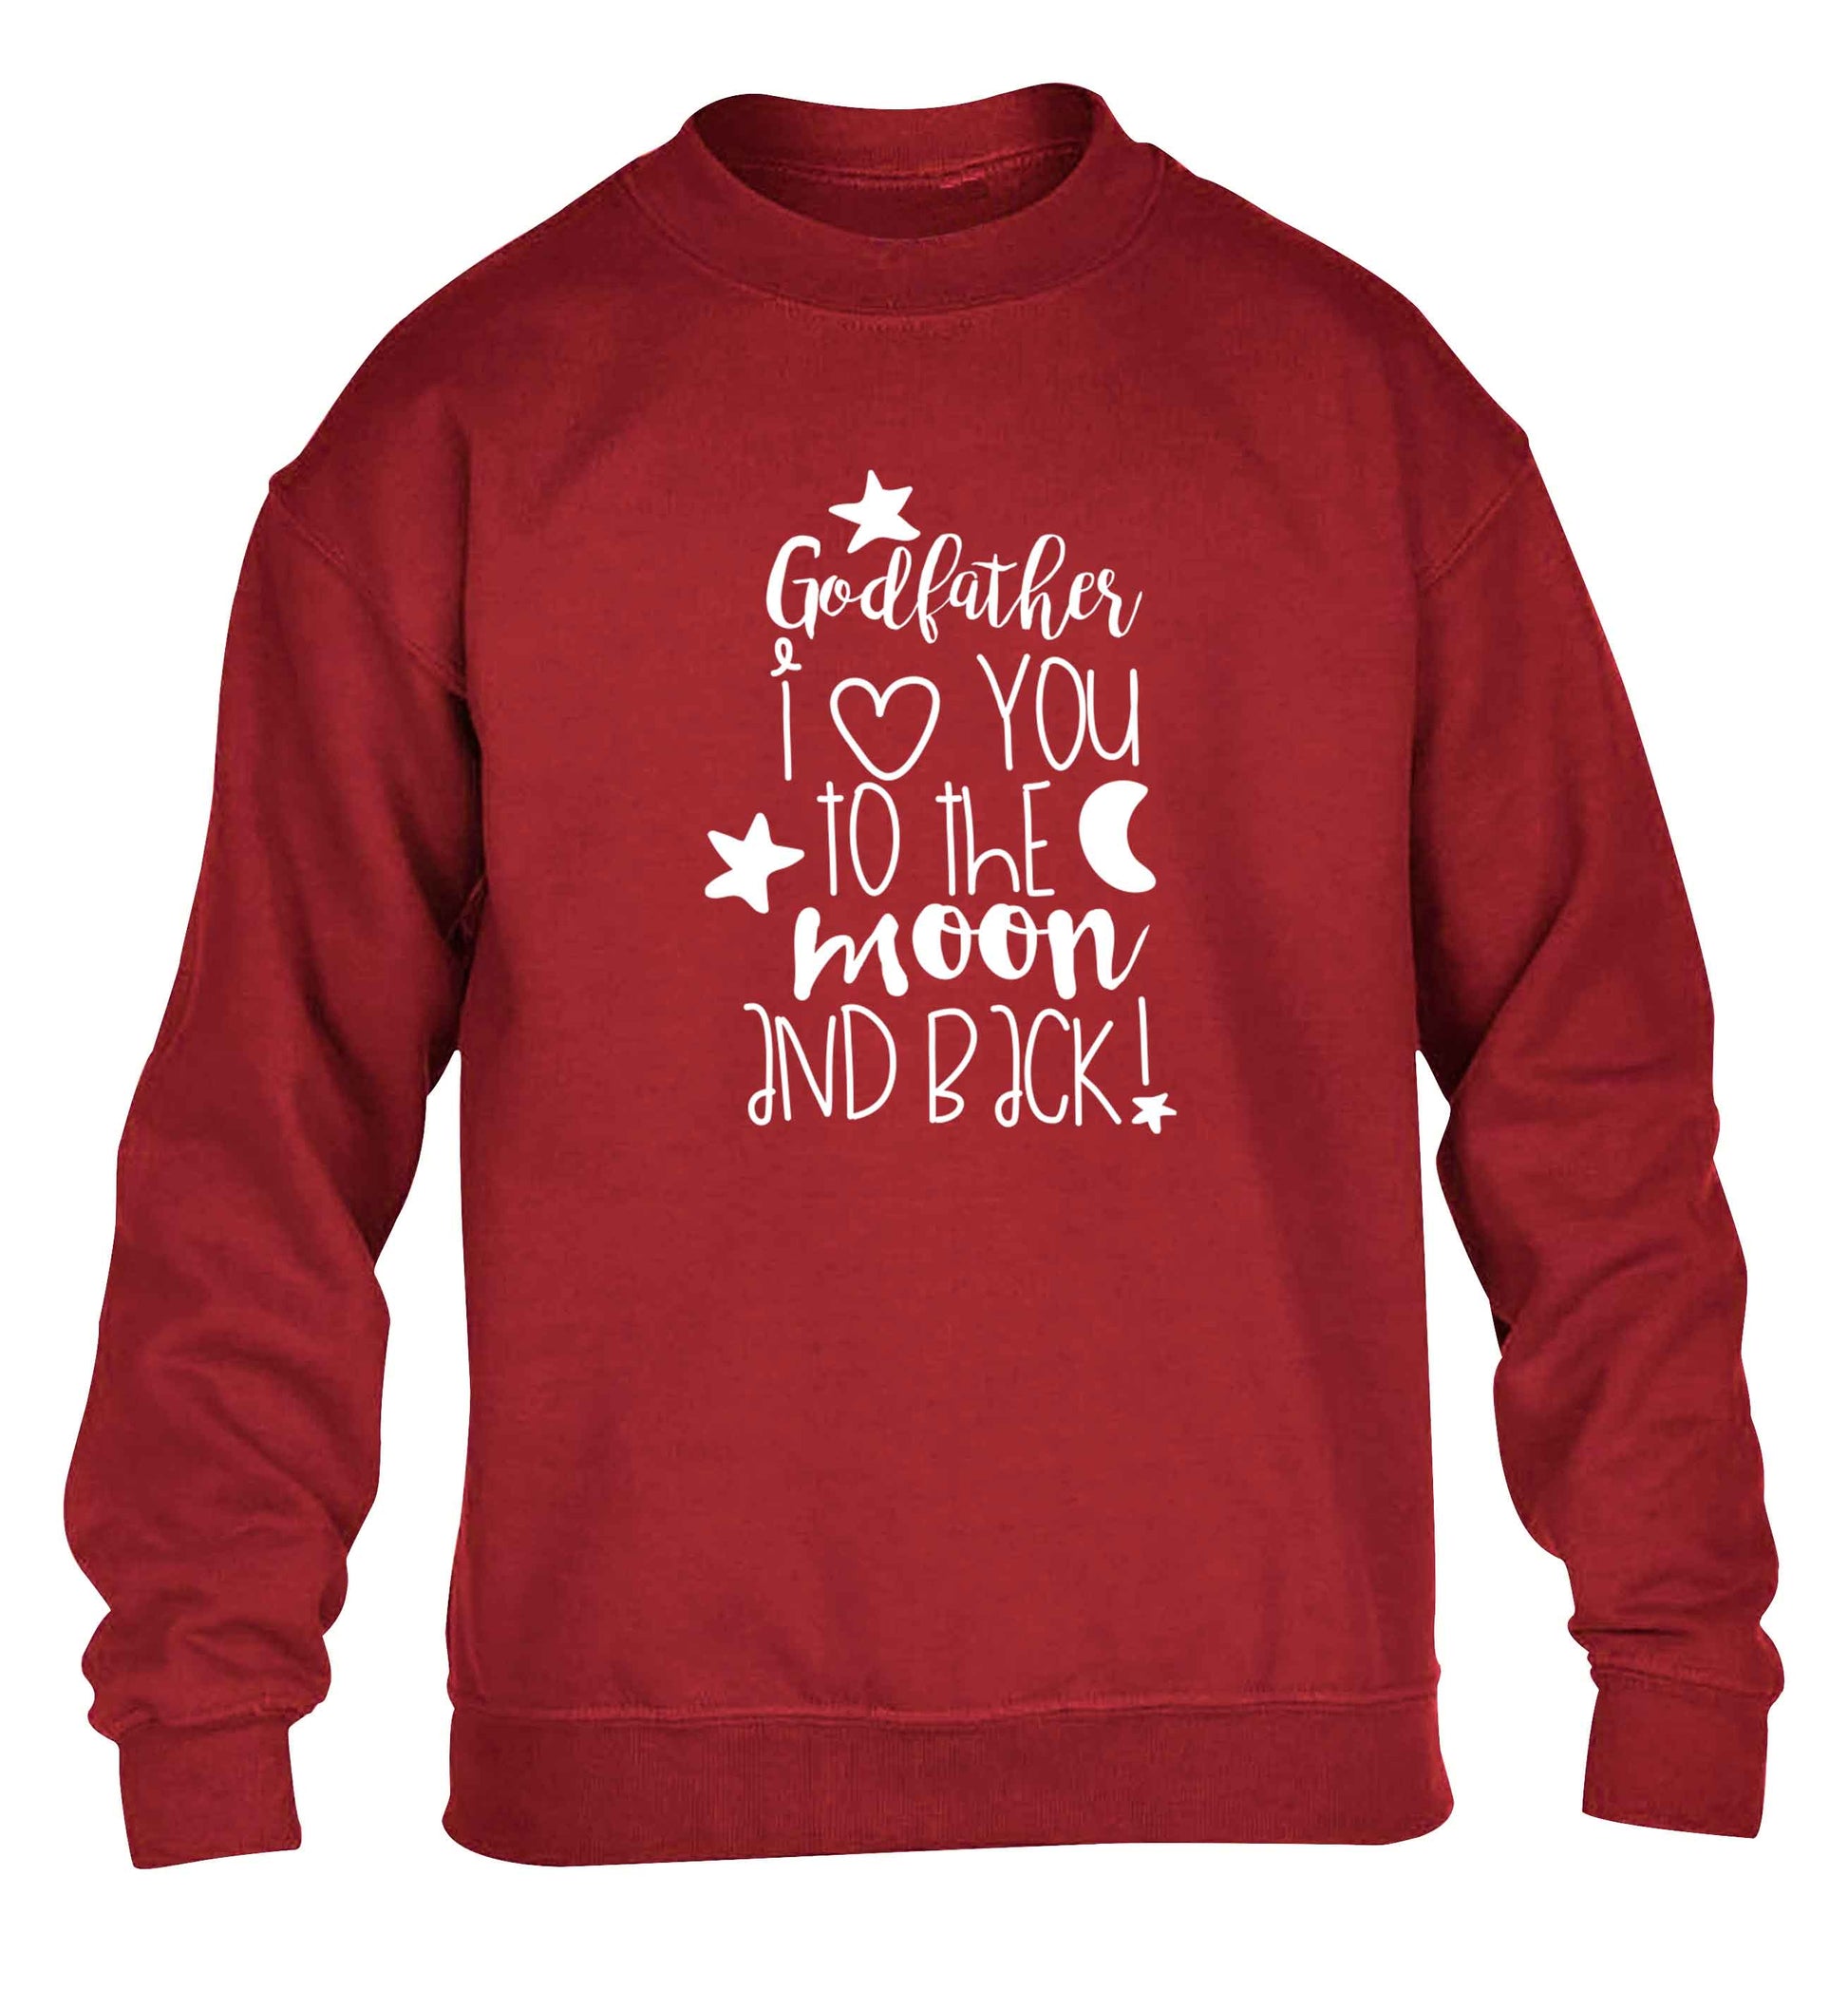 Godfather I love you to the moon and back children's grey sweater 12-13 Years